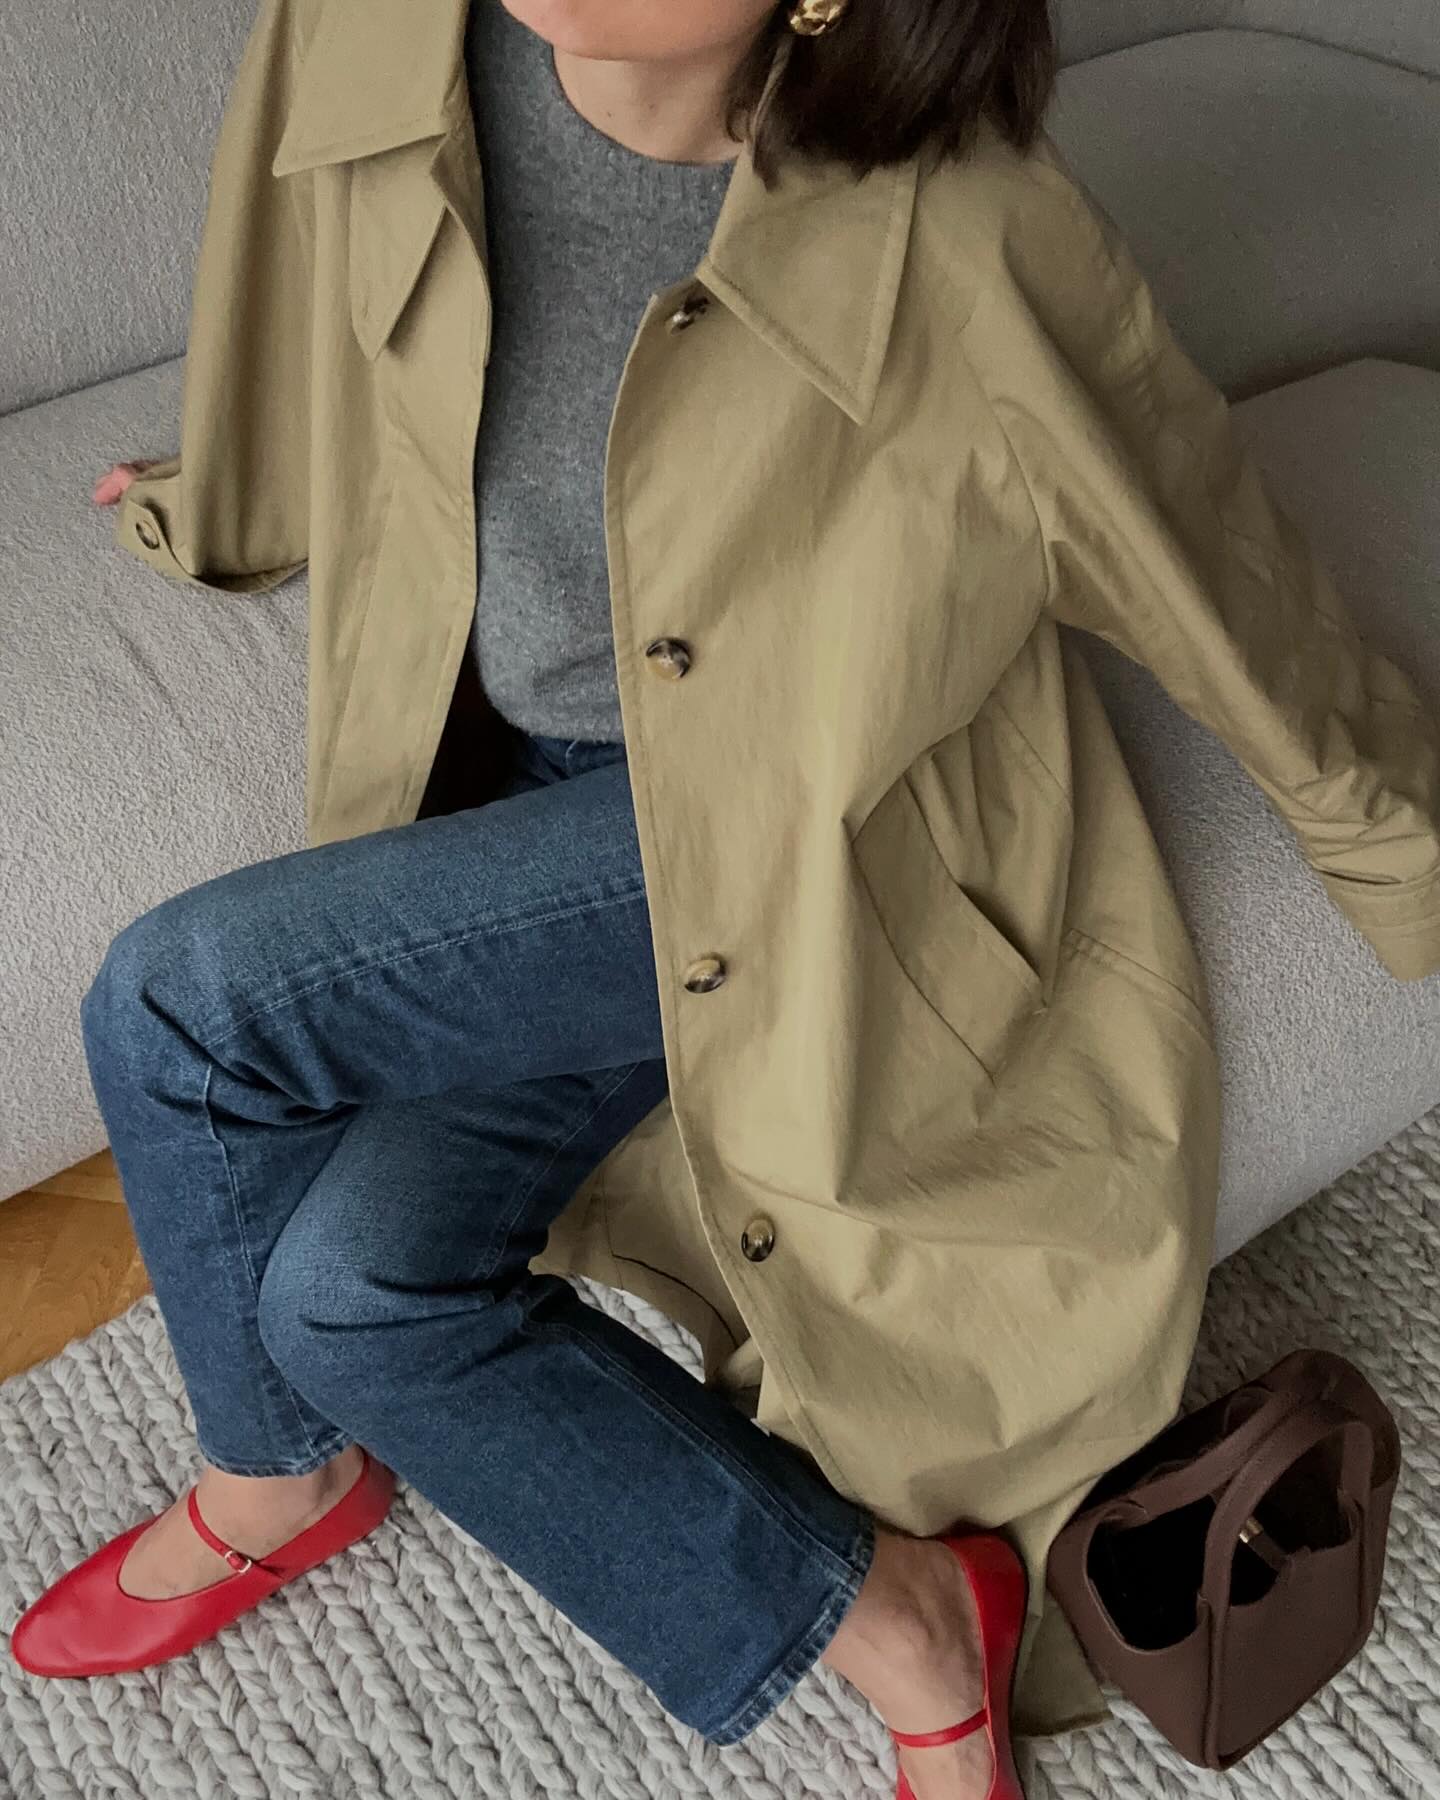 influencer Lucy Alston sits on a sofa wearing a trench coat, gray sweater, brown bag, straight-leg jeans, and red Mary Jane ballet flats